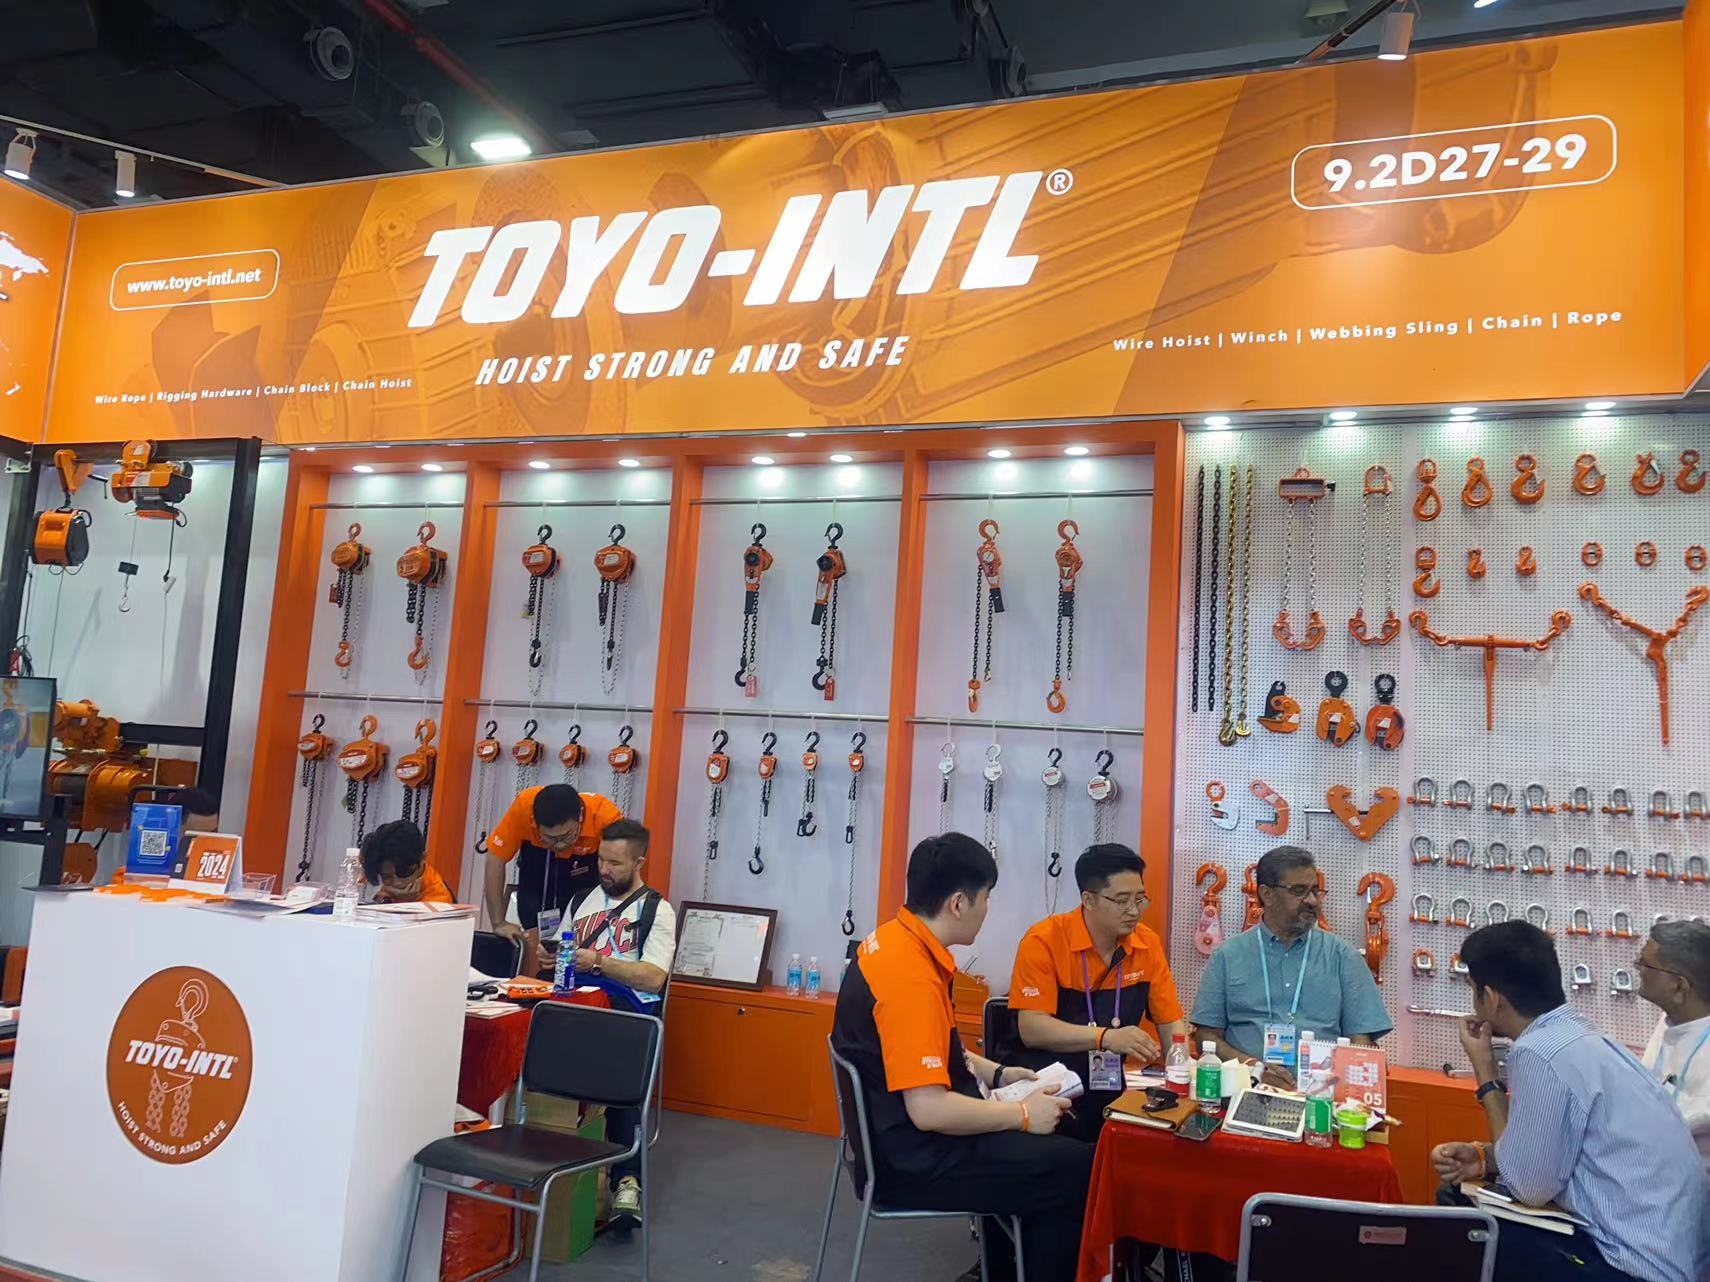 During the 135th Canton Fair, customers from all over the world inquired about ‘TOYO-INTL’.